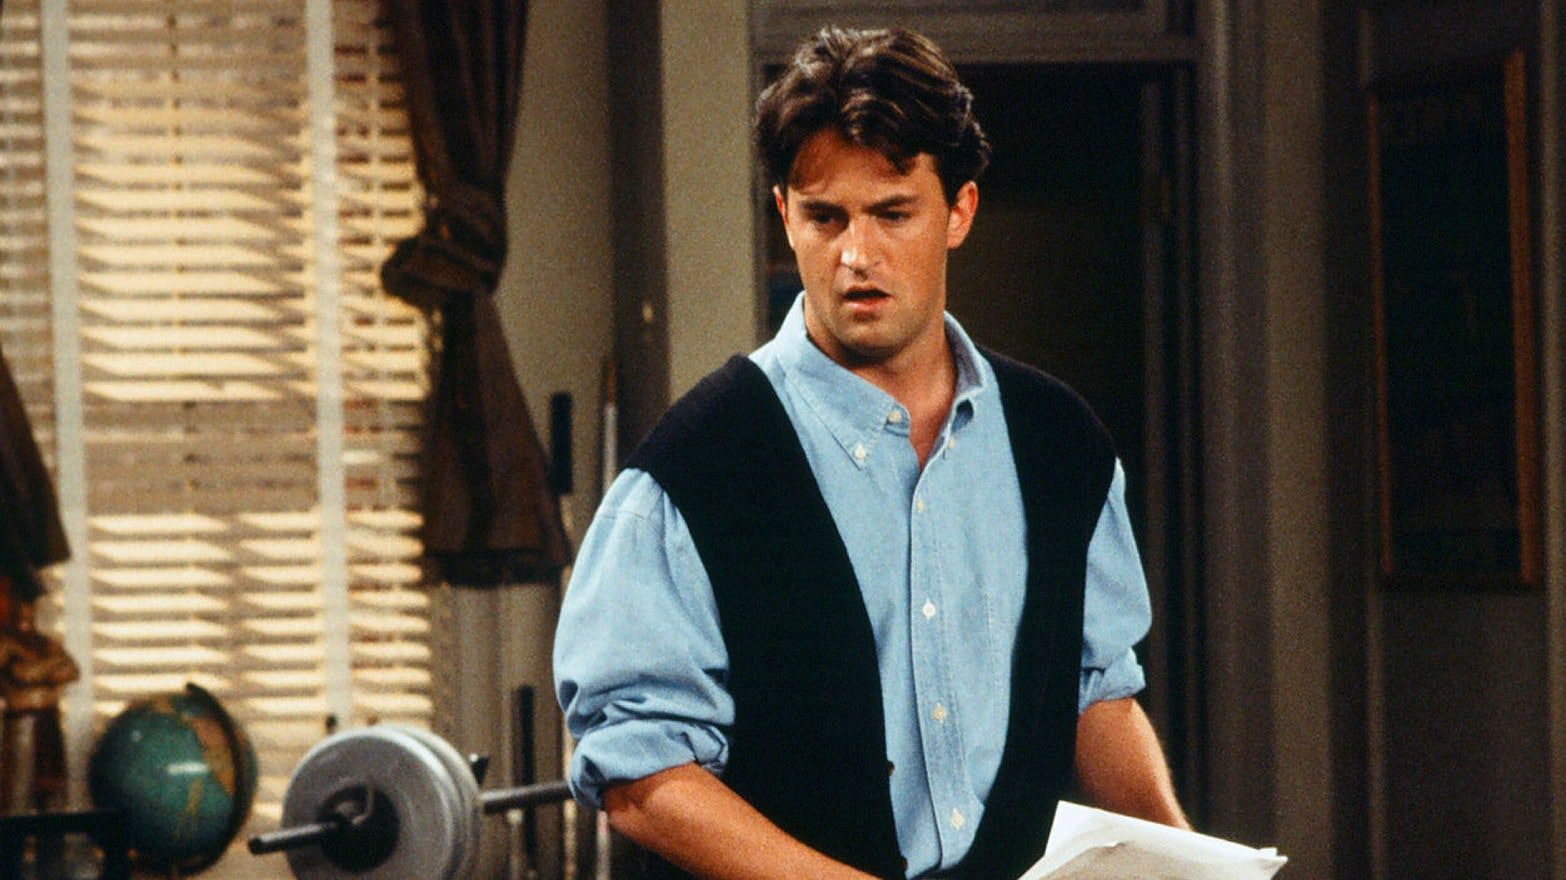 Was Chandler Bing supposed to be gay in Friends?